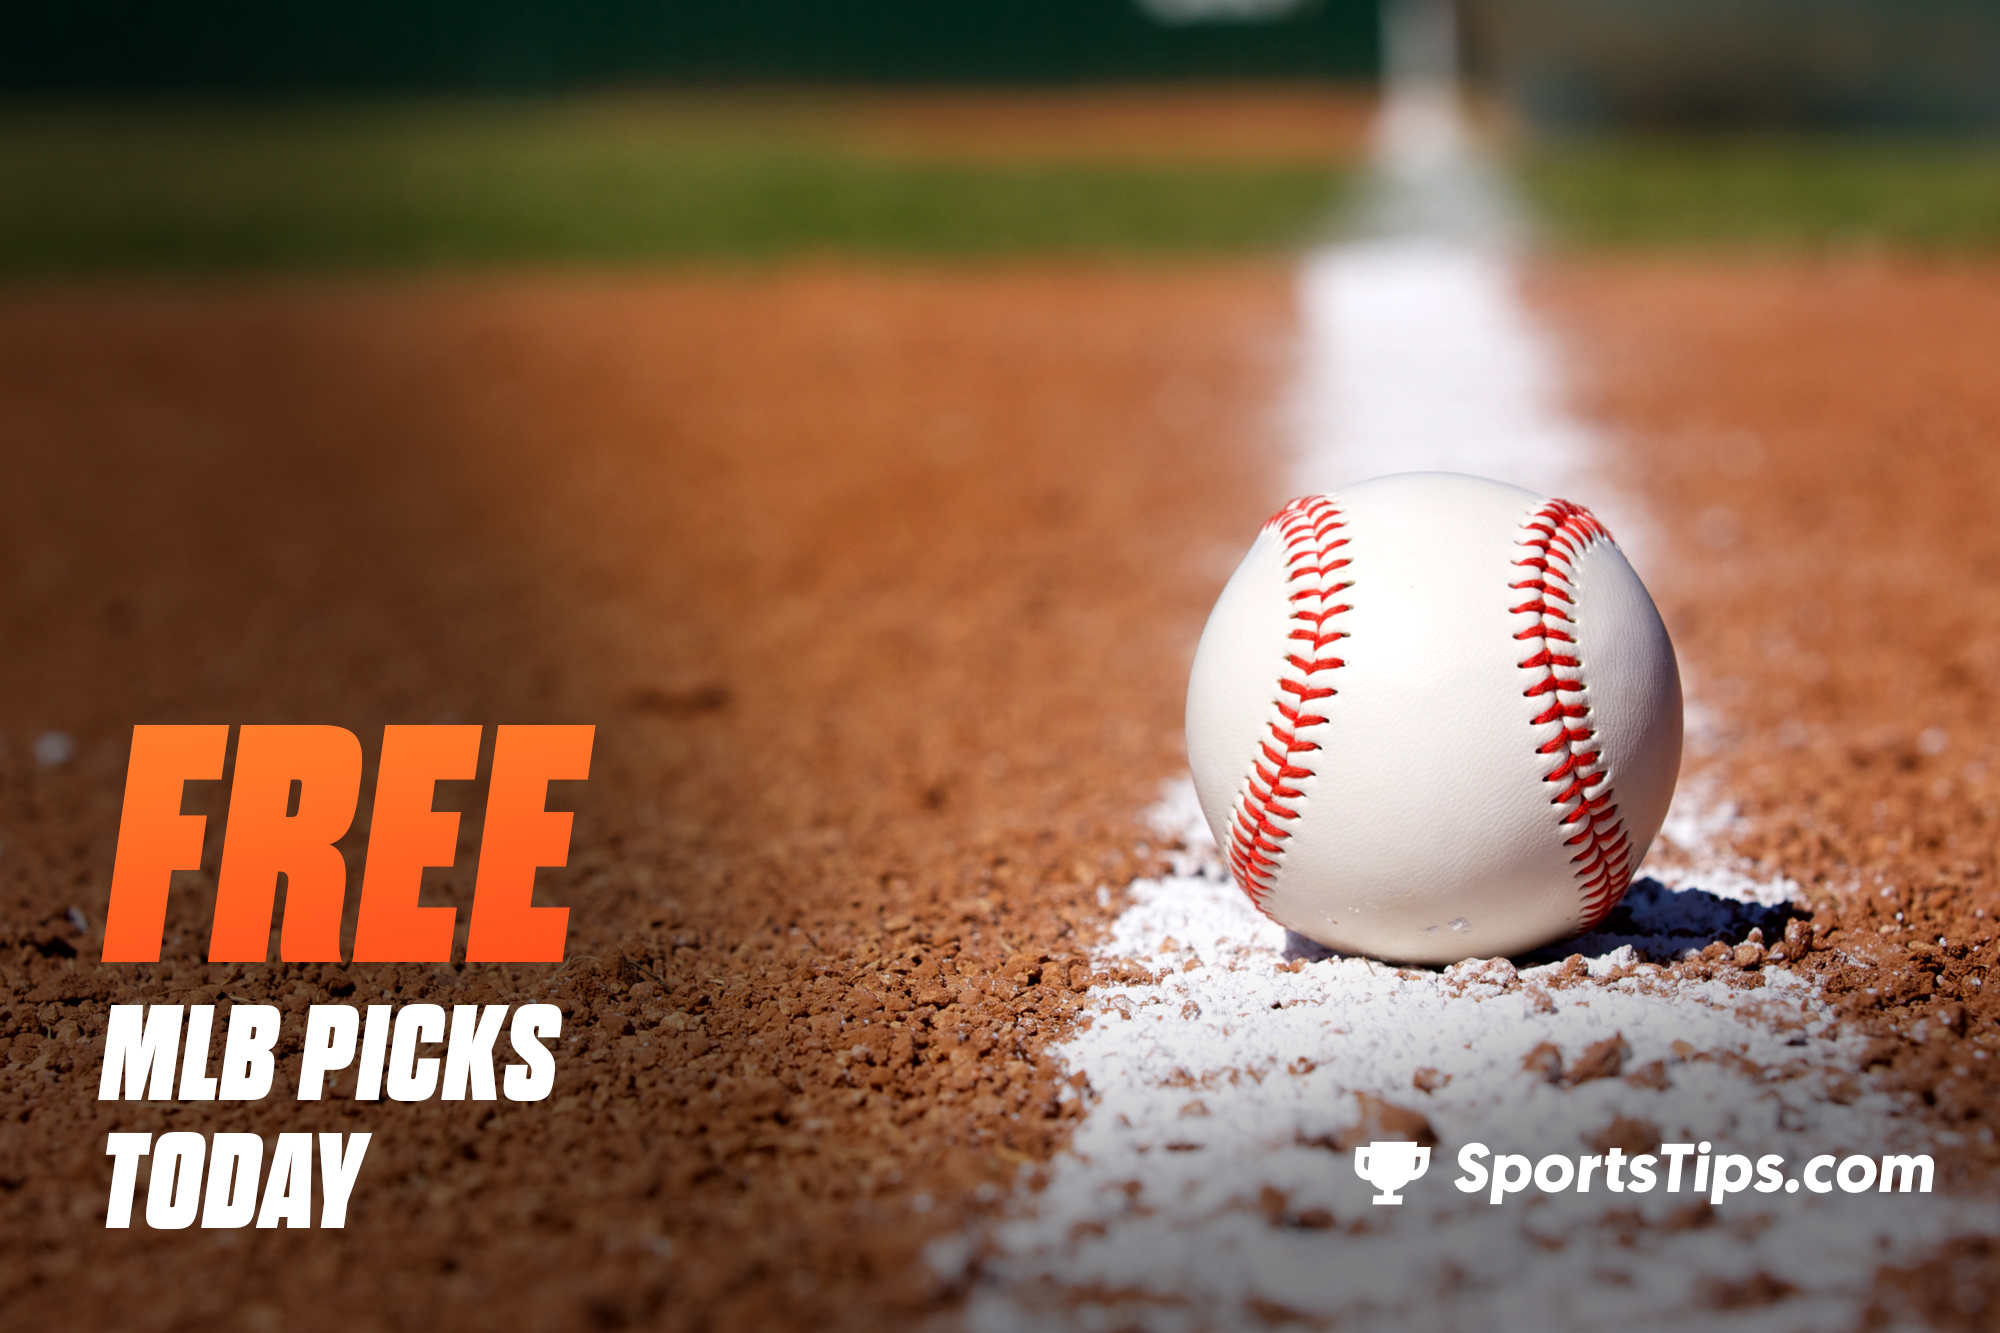 Free MLB Picks Today for Friday, June 17th, 2022